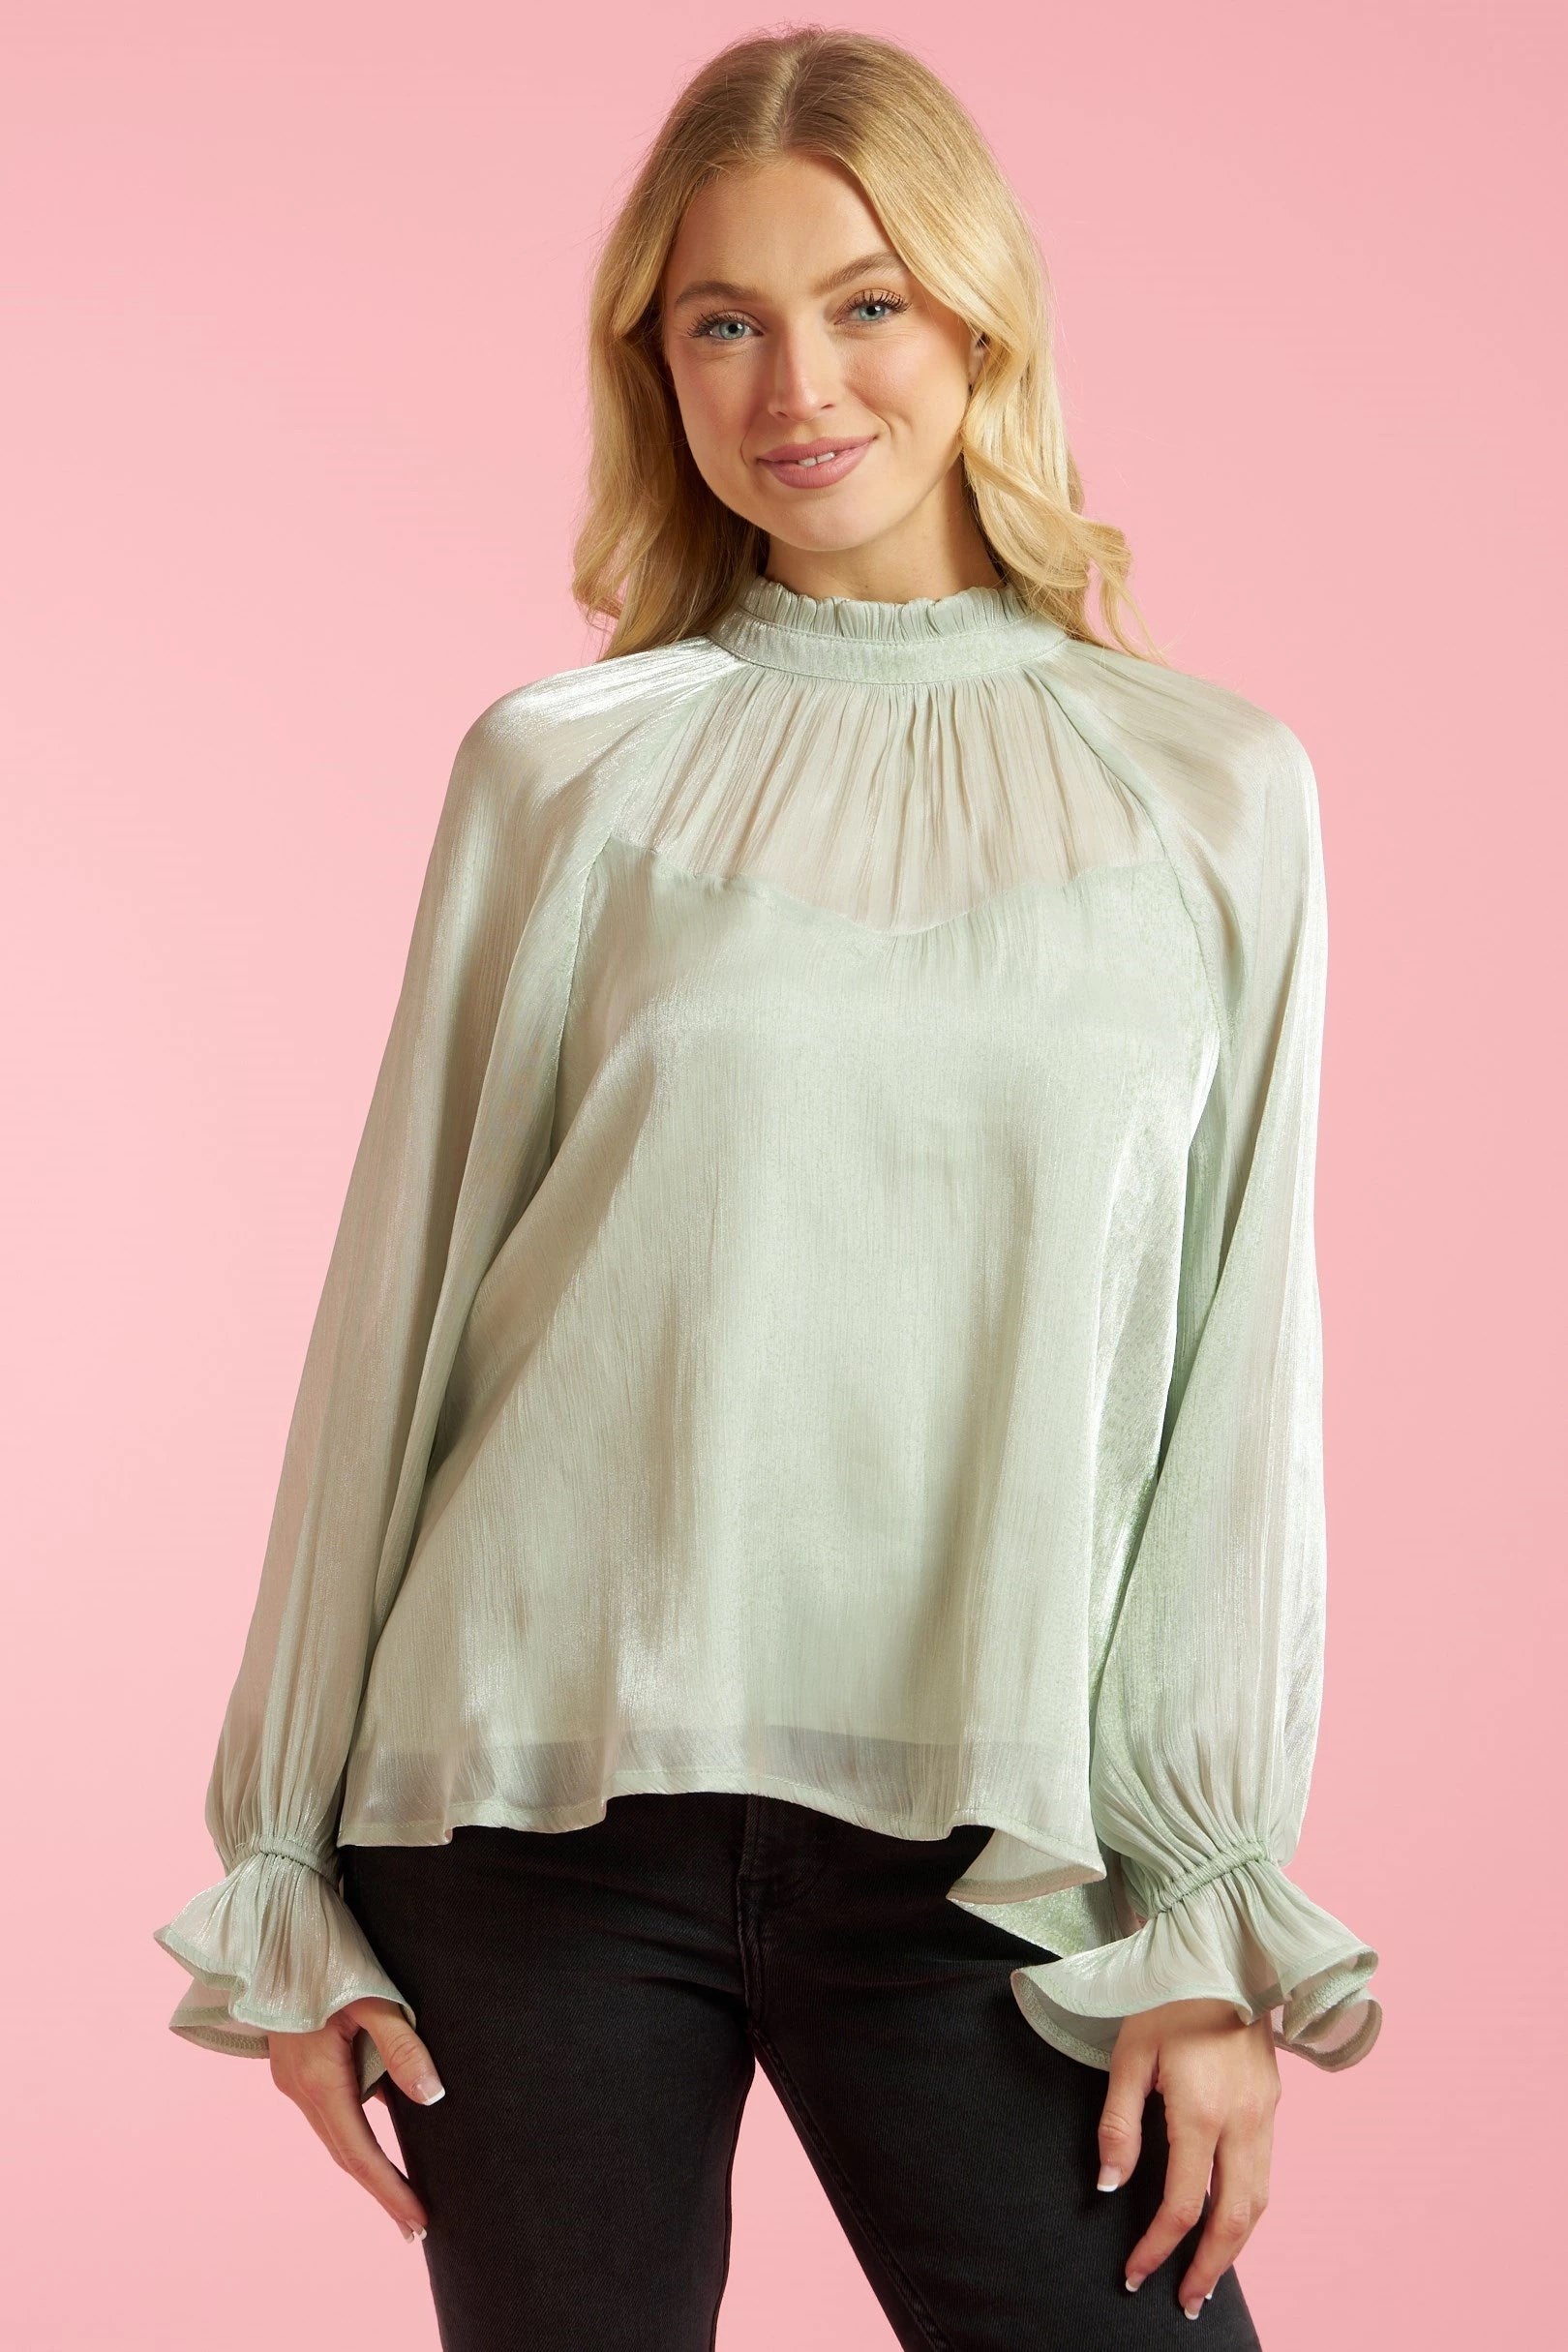 Sage green long sleeve blouse with sheer top and sleeve contrast, ruffle cuffs, high neck, button close back, and shimmer finish.